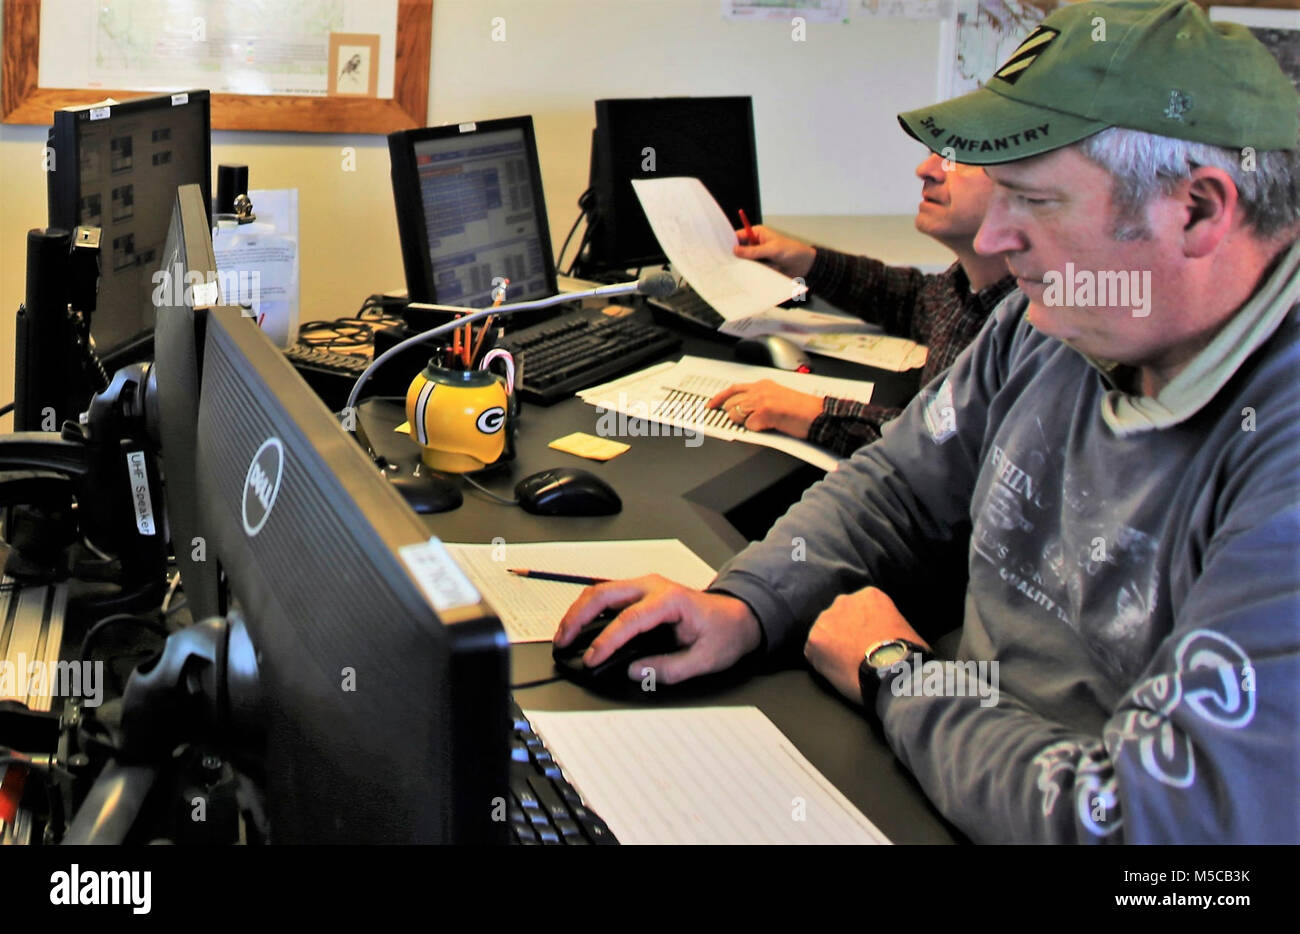 Range Control Technician Mark Confer with the Directorate of Plans, Training, Mobilization and Security works at the Fire Desk on Jan. 16, 2018, at Fort McCoy, Wis. The desk operates communications with units using the range complex as well as Range Maintenance and other personnel throughout 46,000 acres of training areas on Fort McCoy. (U.S. Army Stock Photo